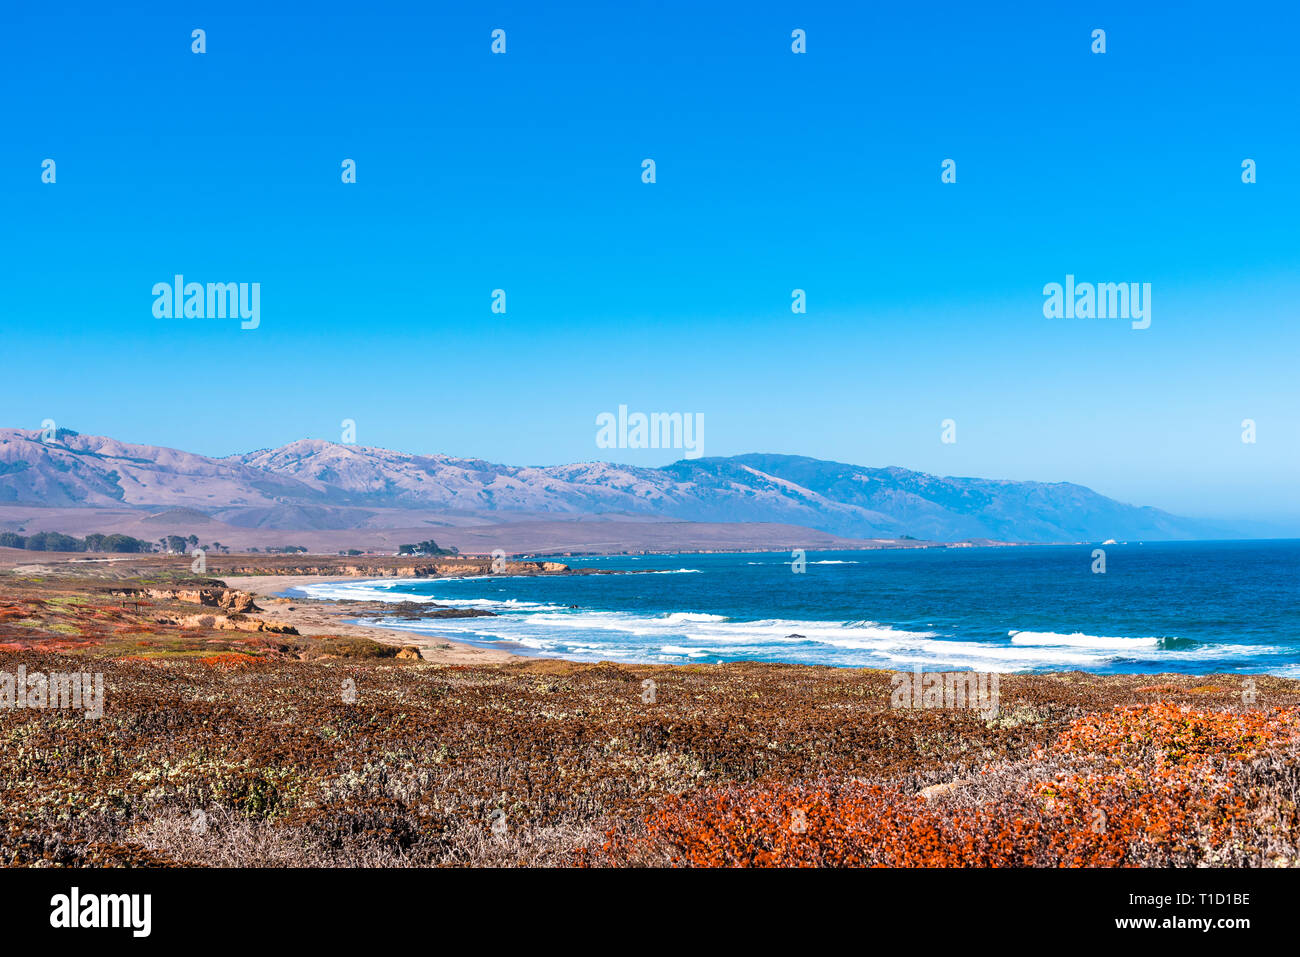 Autumn flower fields overlooking coastline with breaking waves, blue ocean and mountains under bright blue sky. Stock Photo